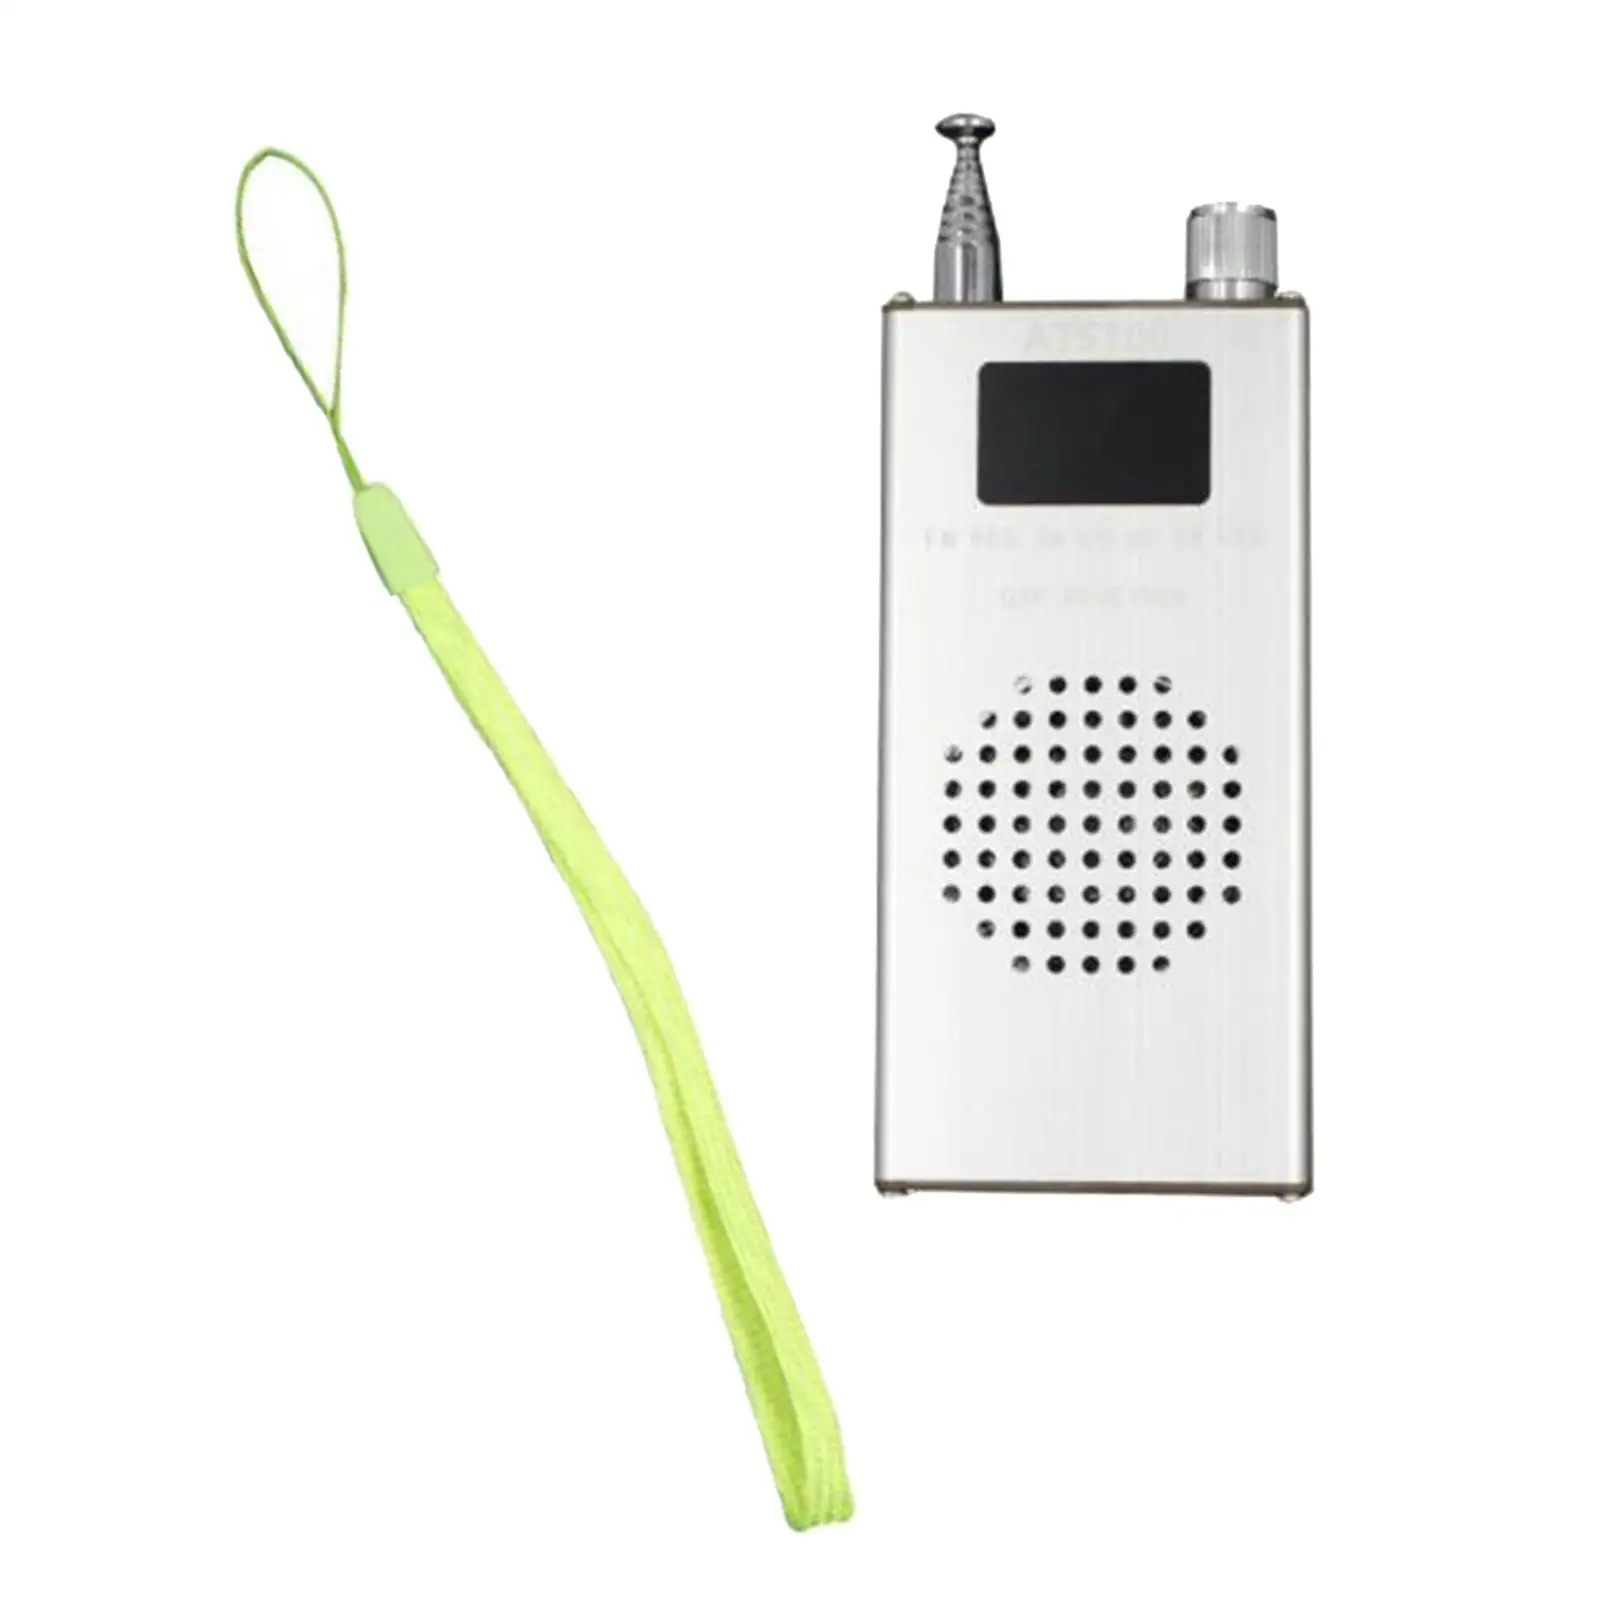  Band  Receiver SI4732 DSP Receiver Durable Portable Aluminum Alloy Handheld Radio Receiver Festival Perfect Gift